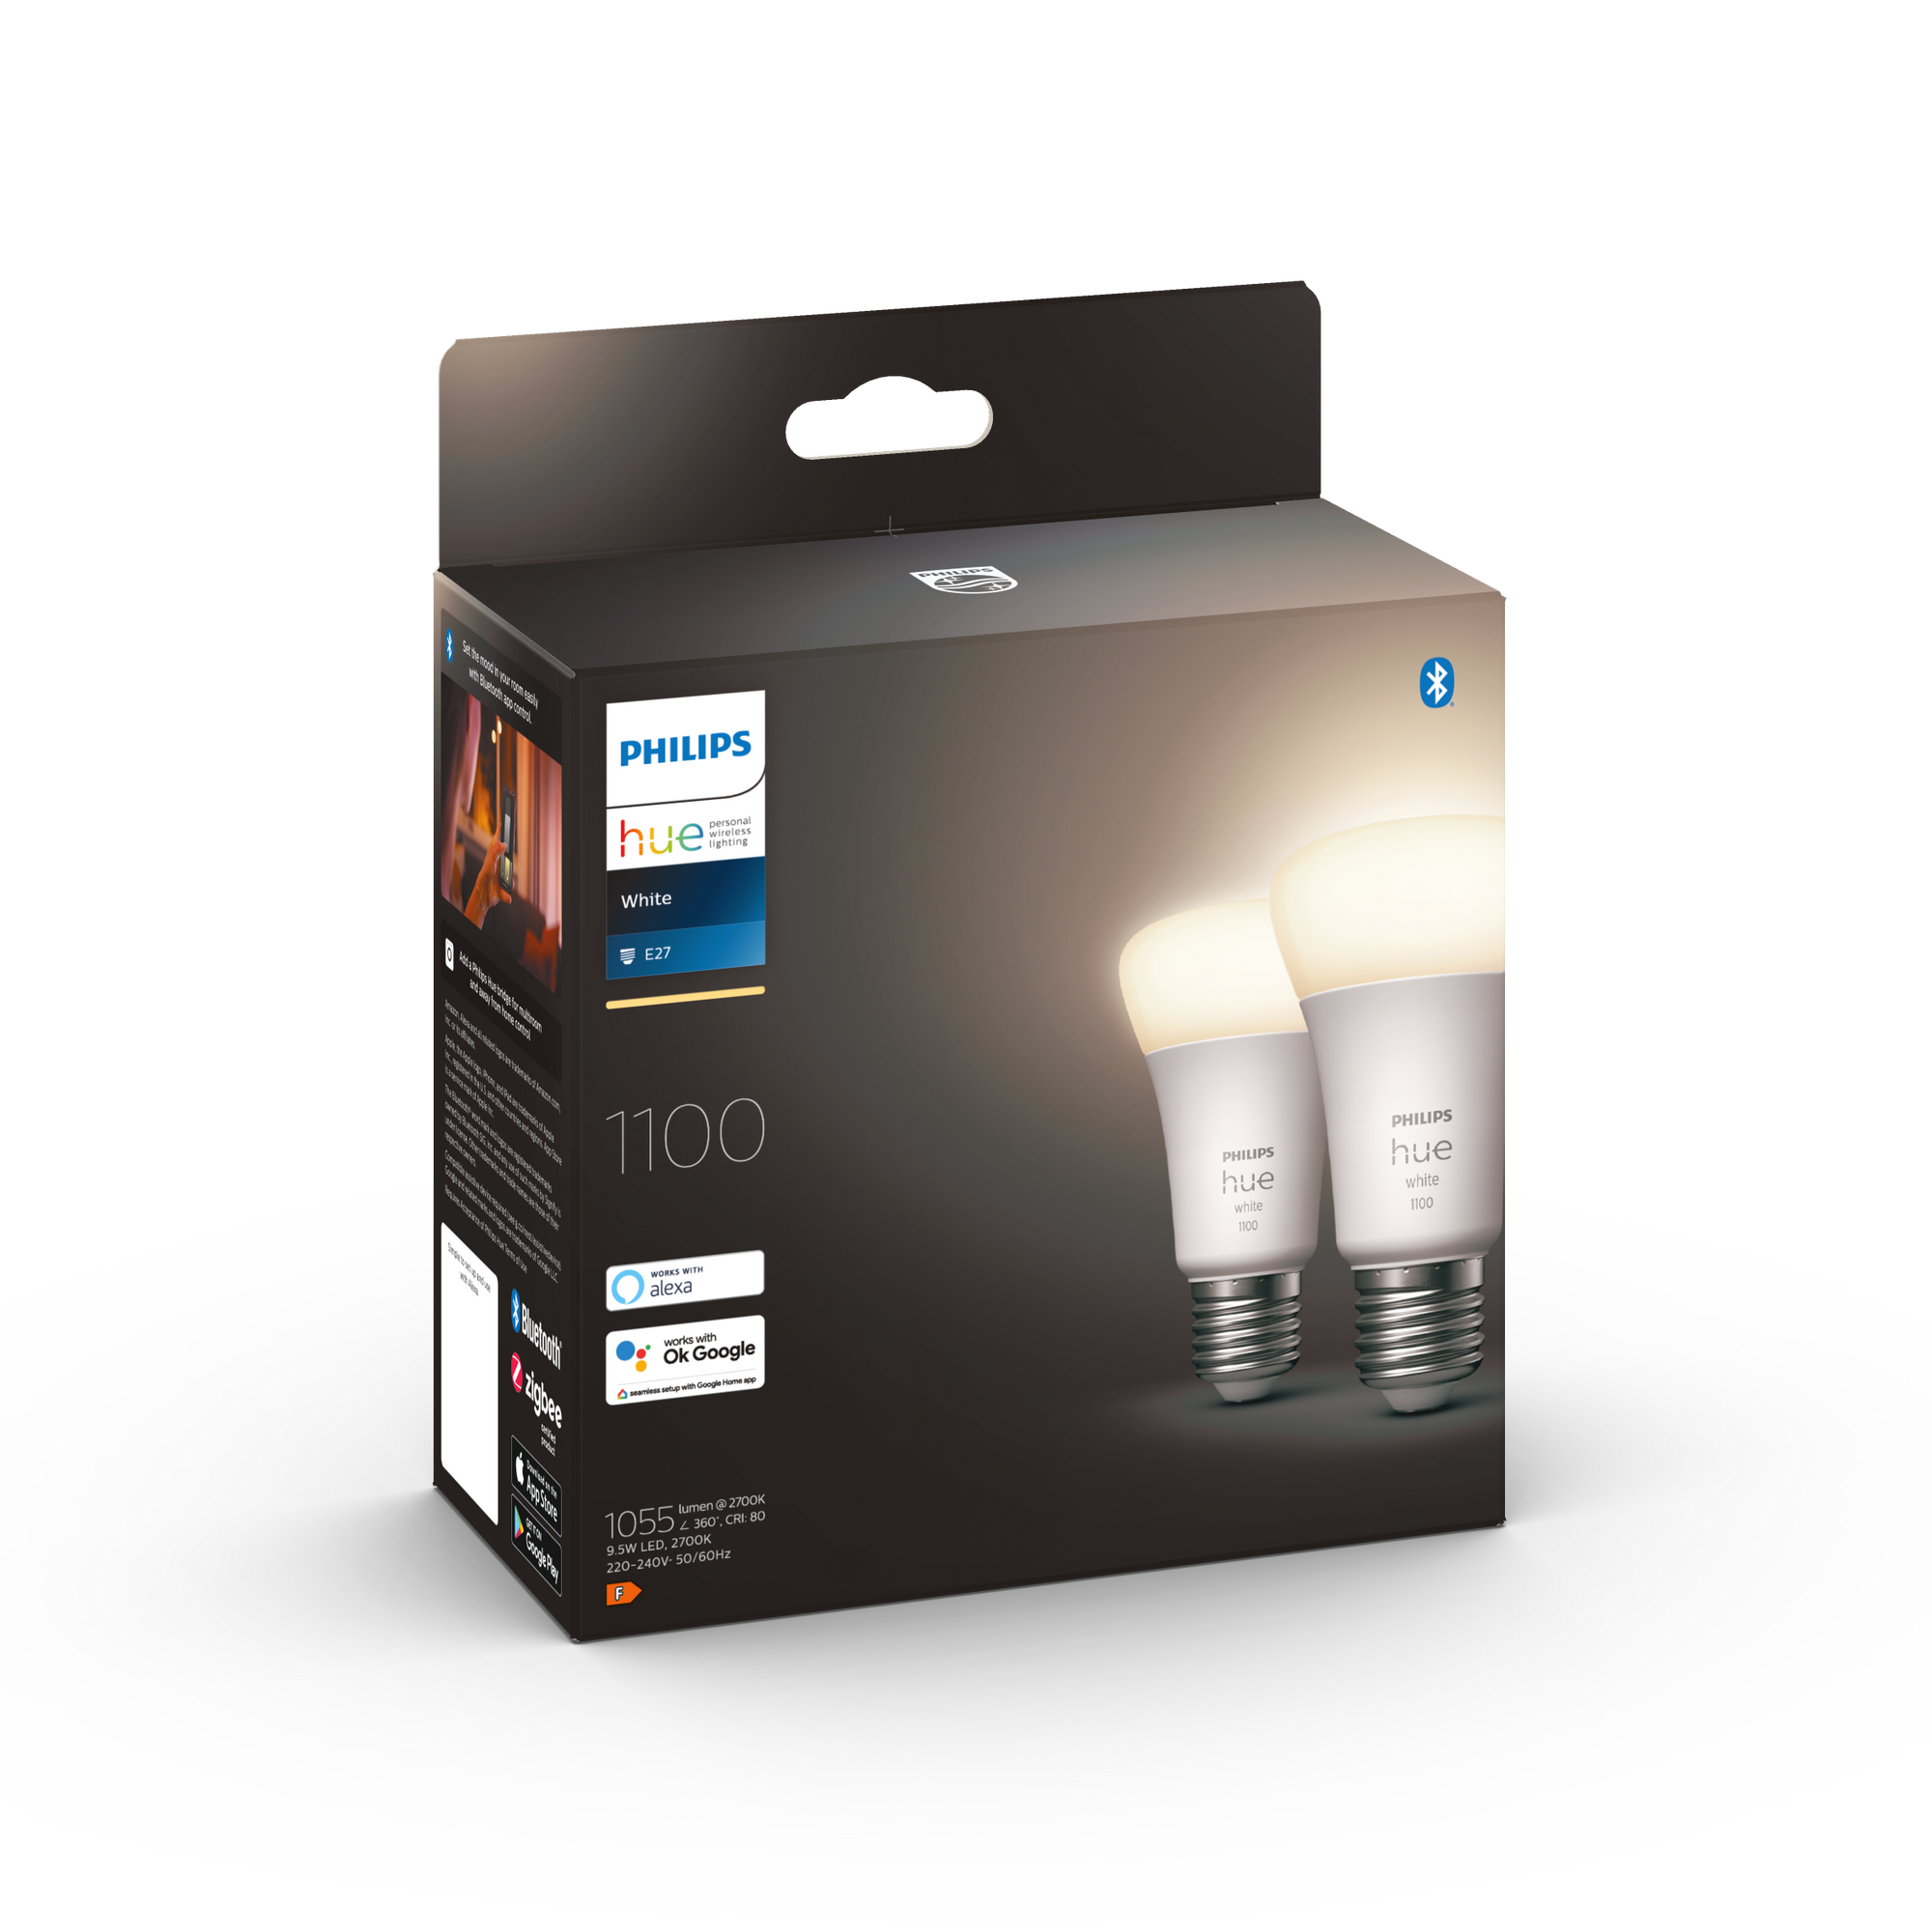 LED-Lampe 'Hue White' E27 9,5 W, 2er-Pack + product picture